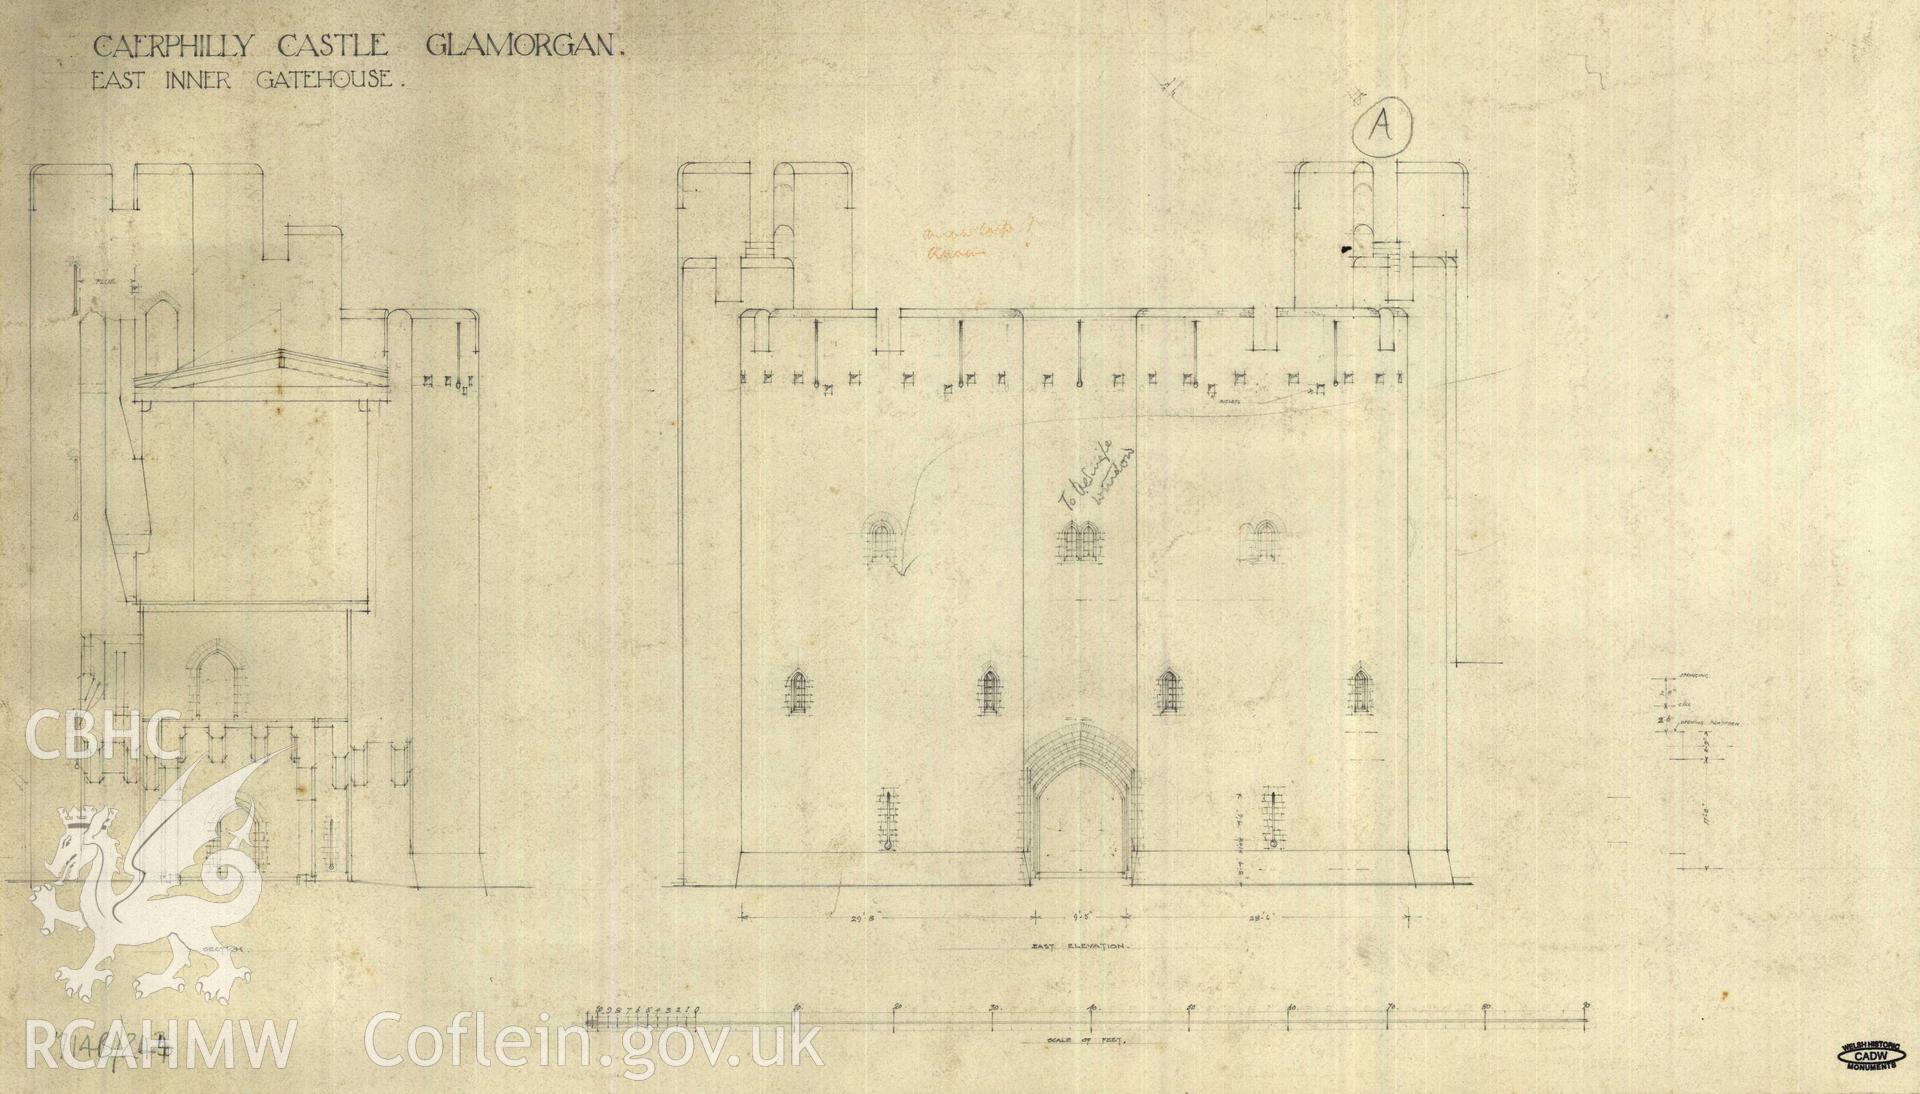 Cadw guardianship monument drawing of Caerphilly Castle. Inner E gate, sect + ext (E) elev. Cadw Ref. No:714B/244. Scale 1:96.